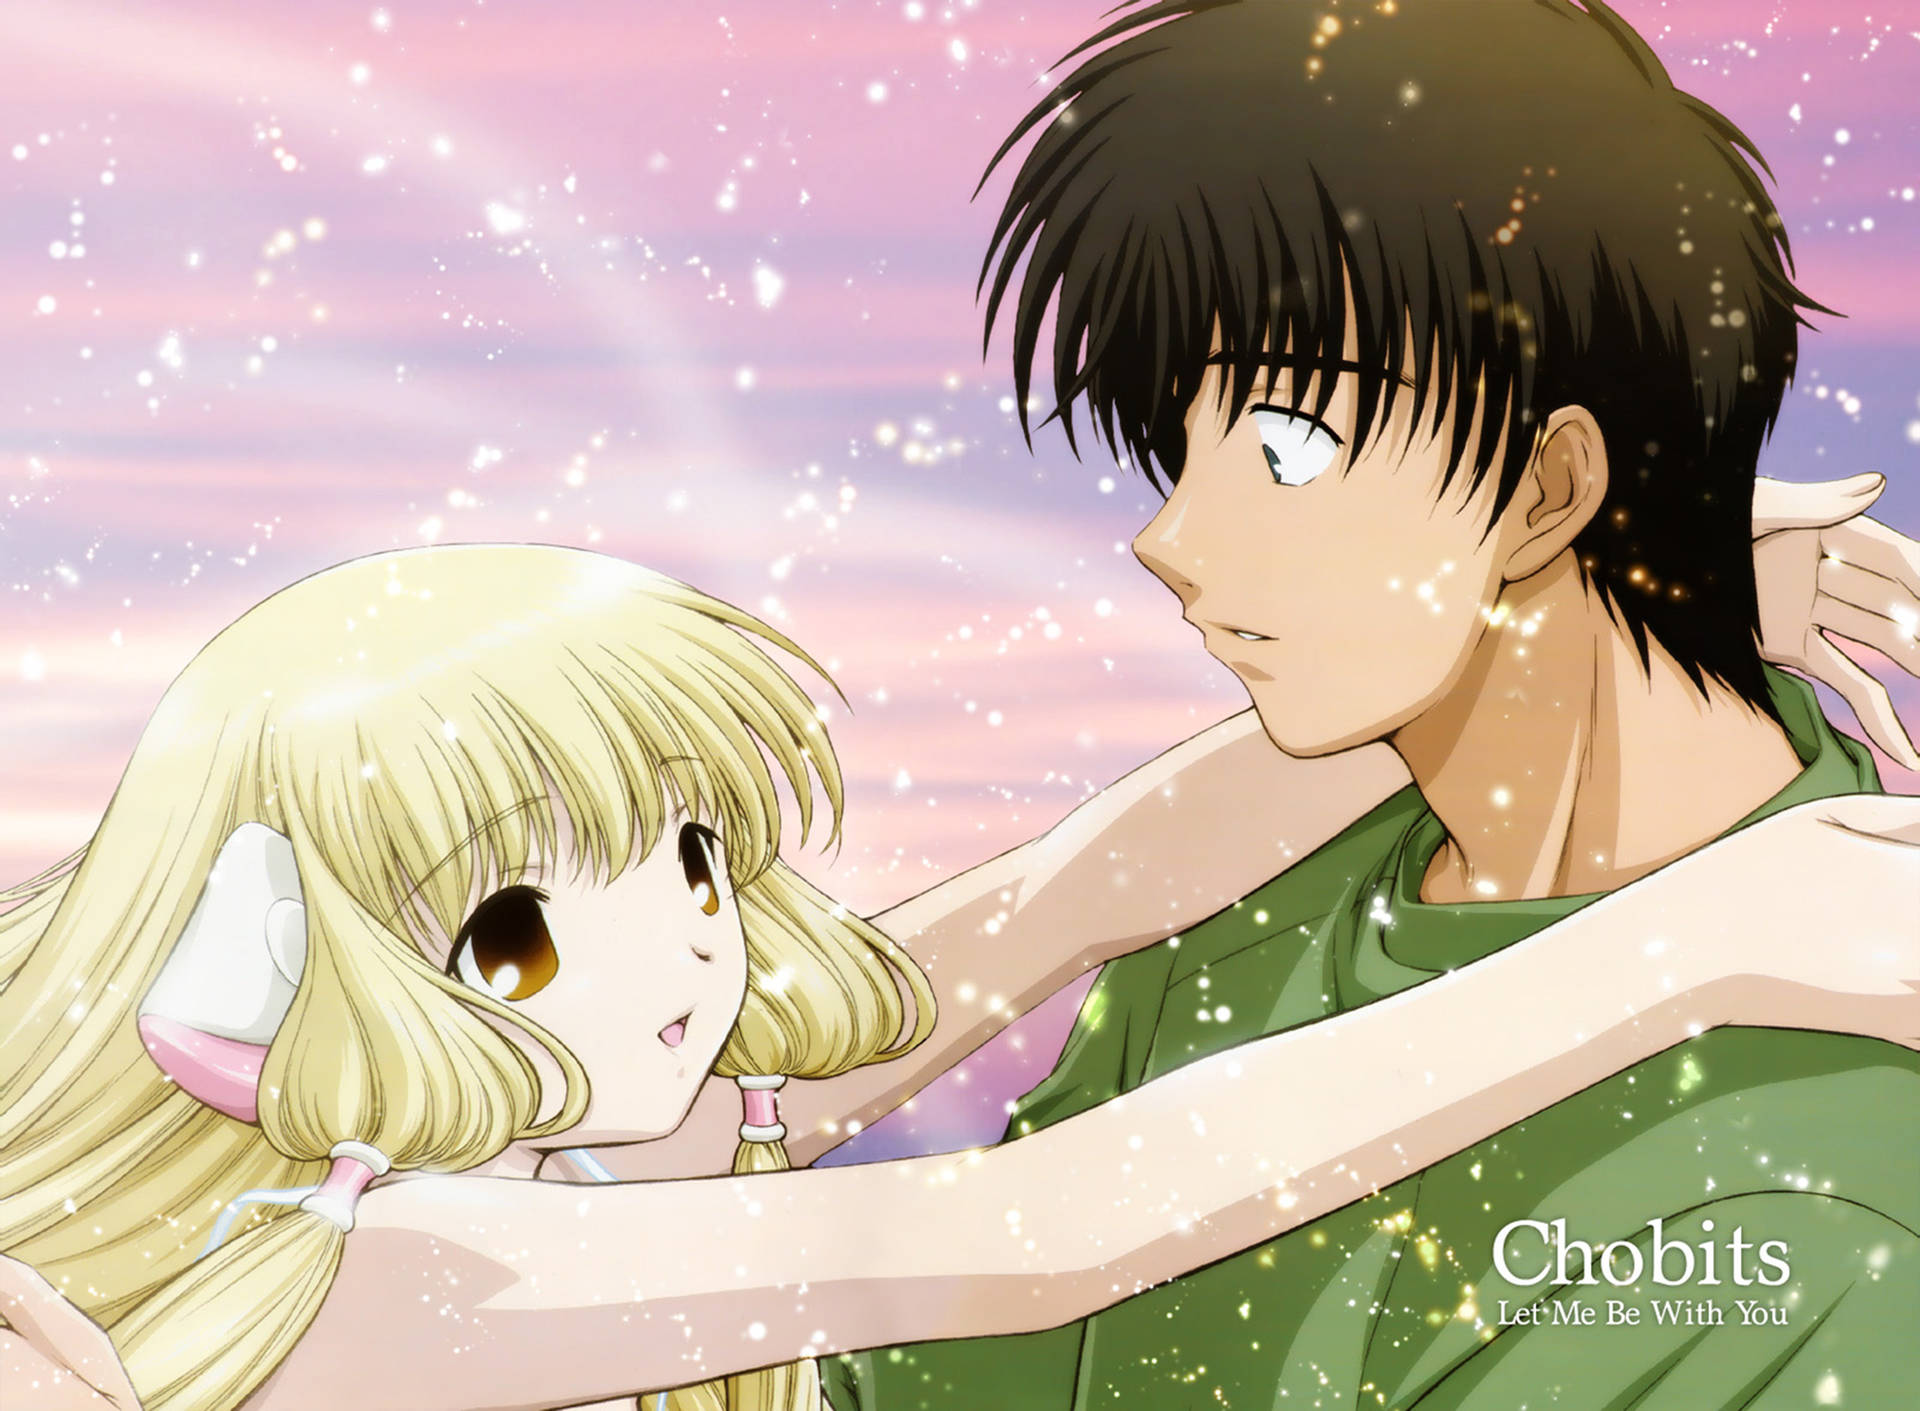 Chobits Be With You Art Background